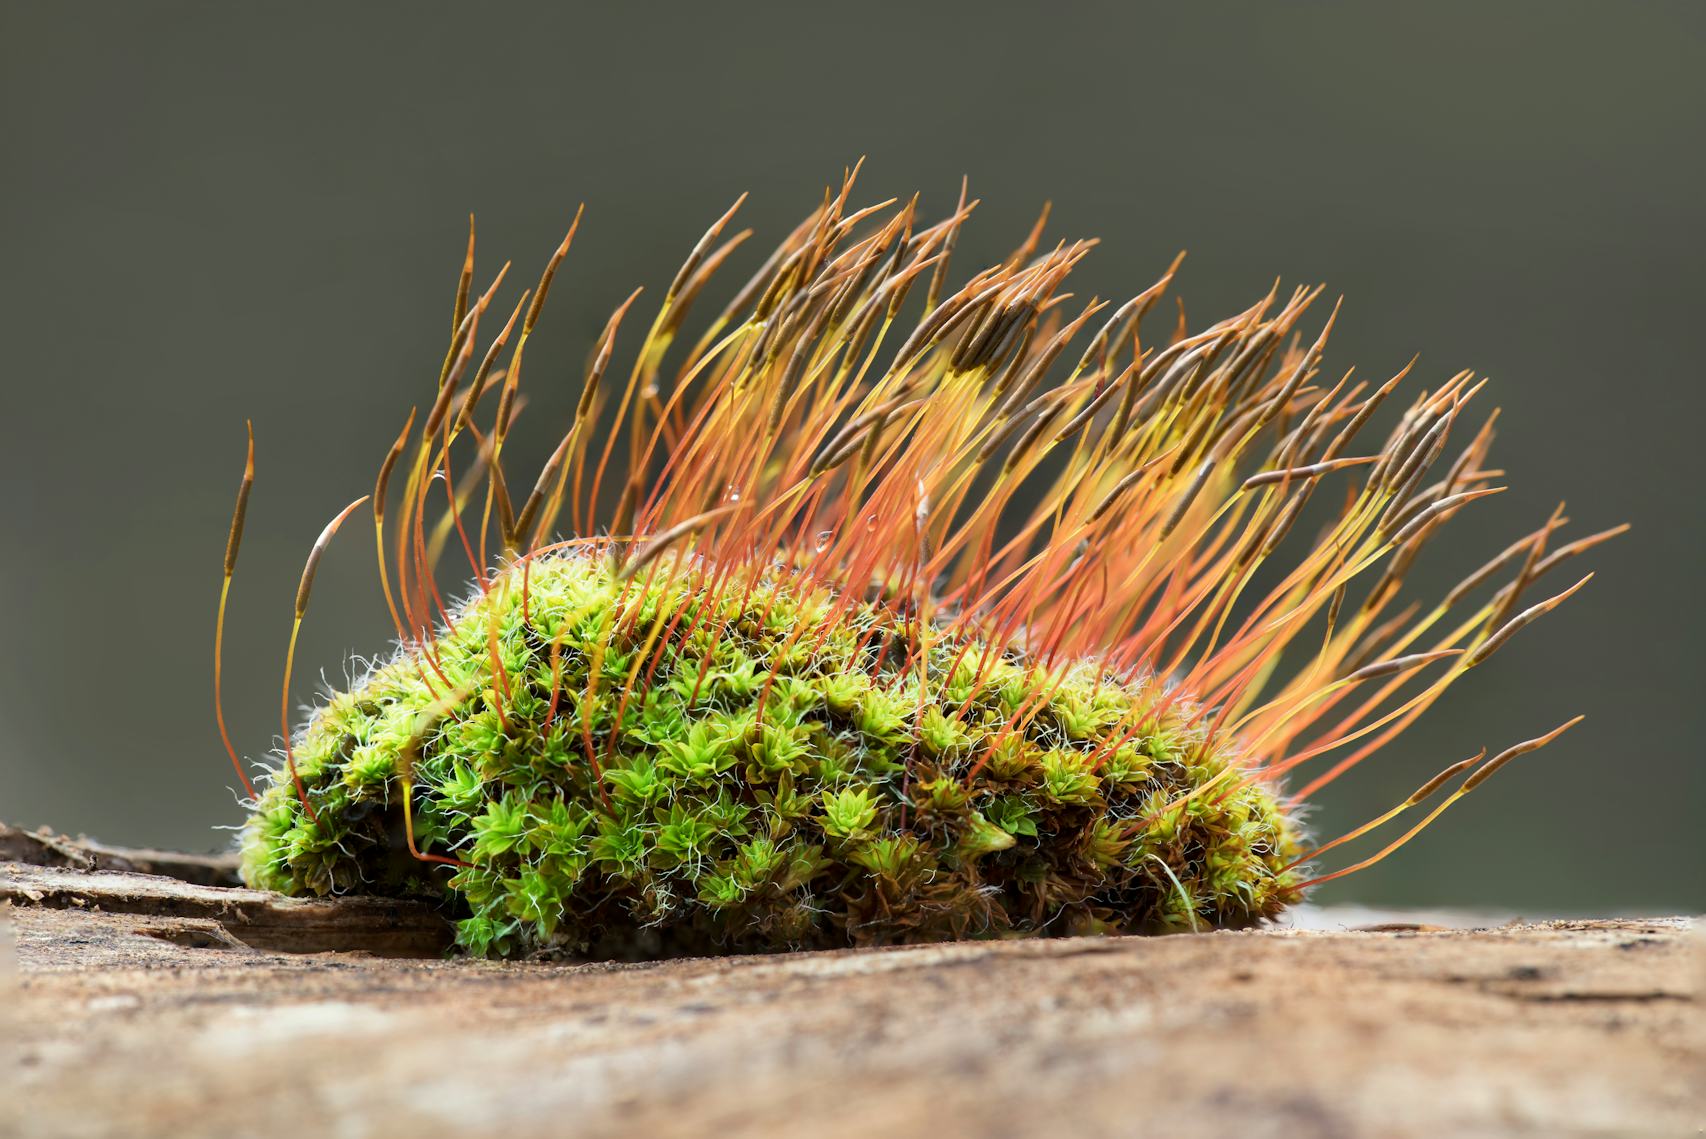 Moss: The 350-million-year-old plants that turn the unsightly